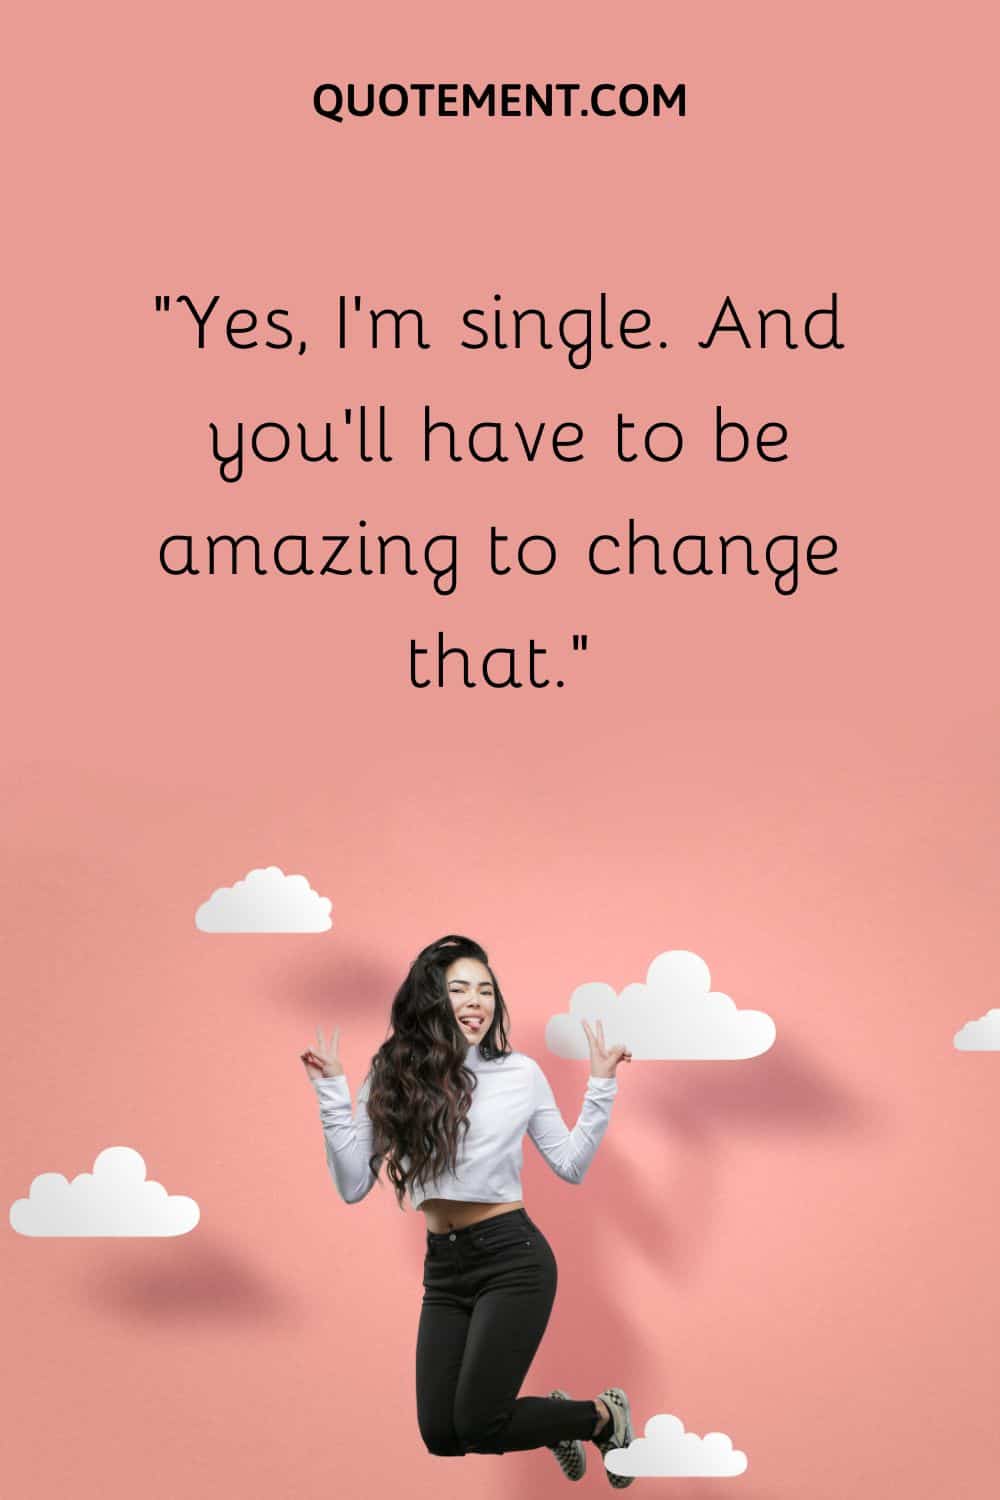 Yes, I’m single. And you’ll have to be amazing to change that.